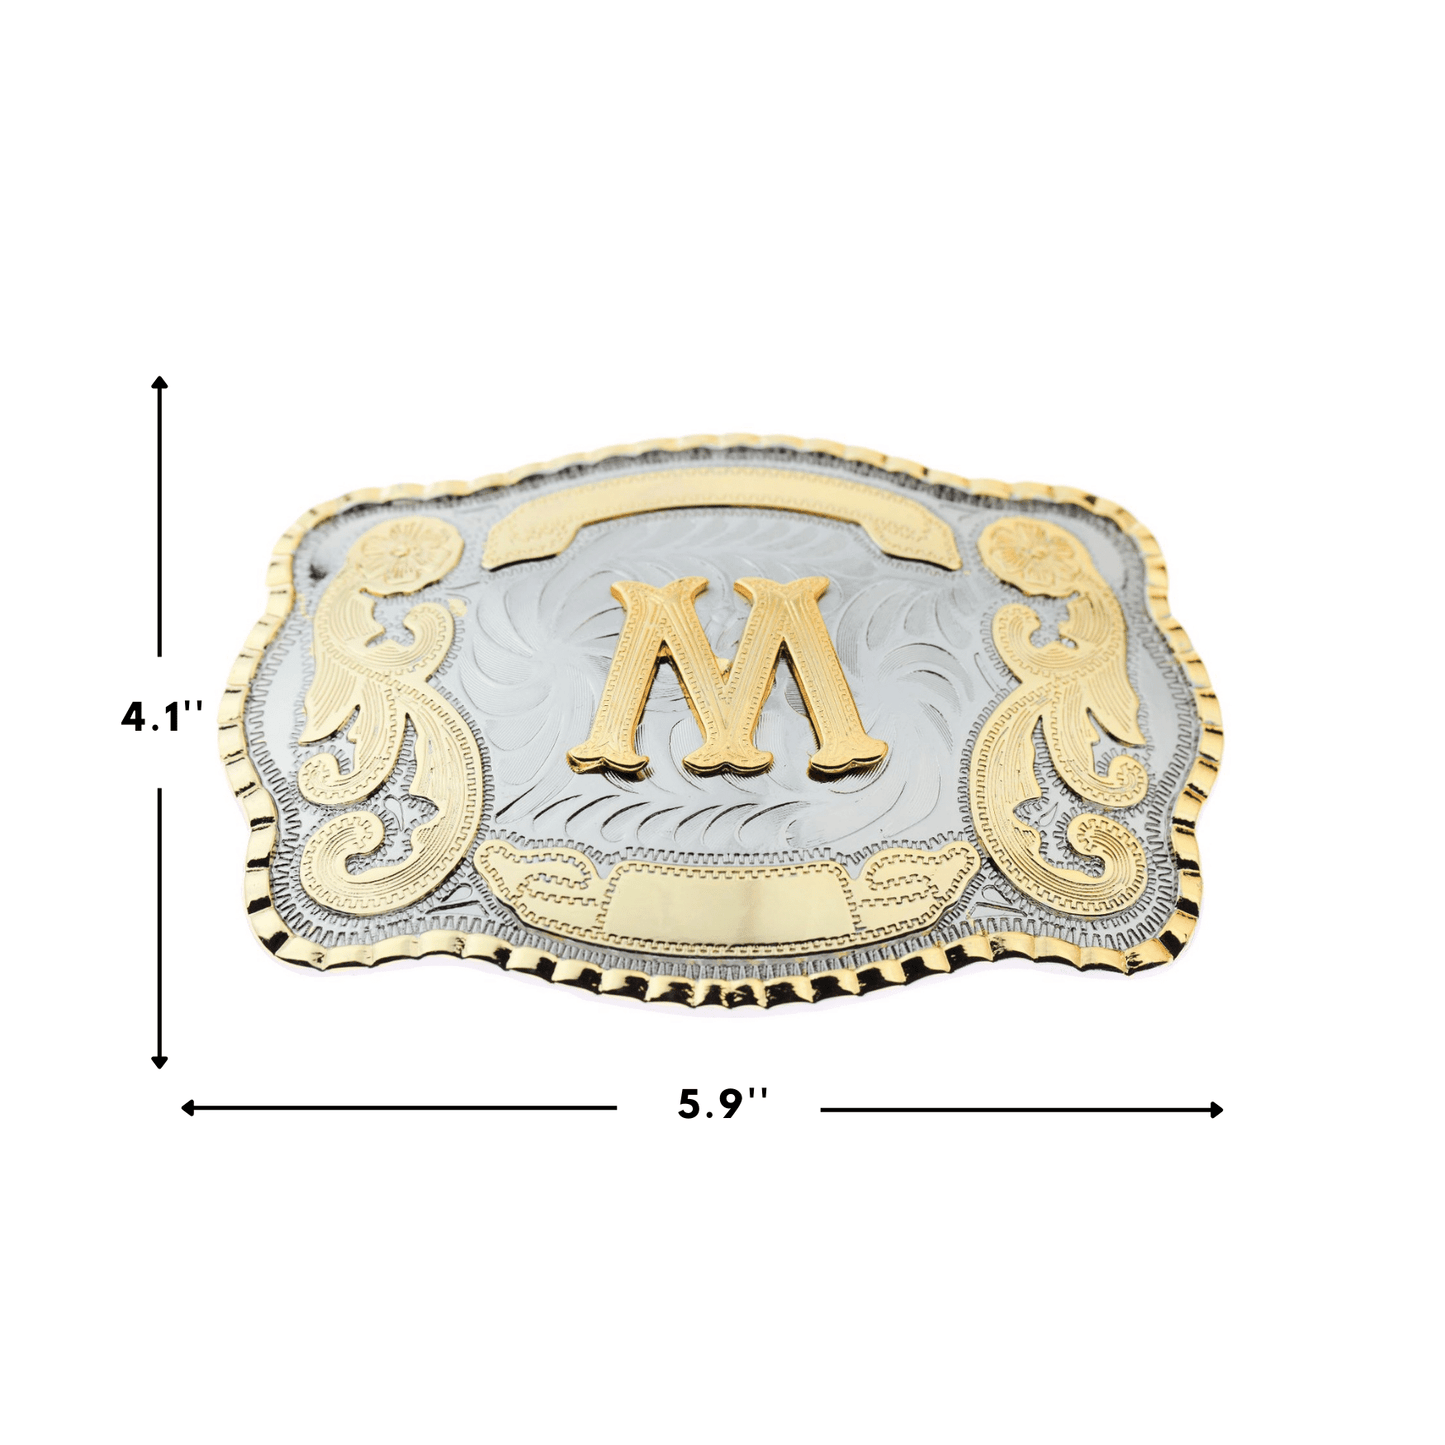 Initial Letter "M" Cowboy Rodeo Western Large Gold Tone Belt Buckle